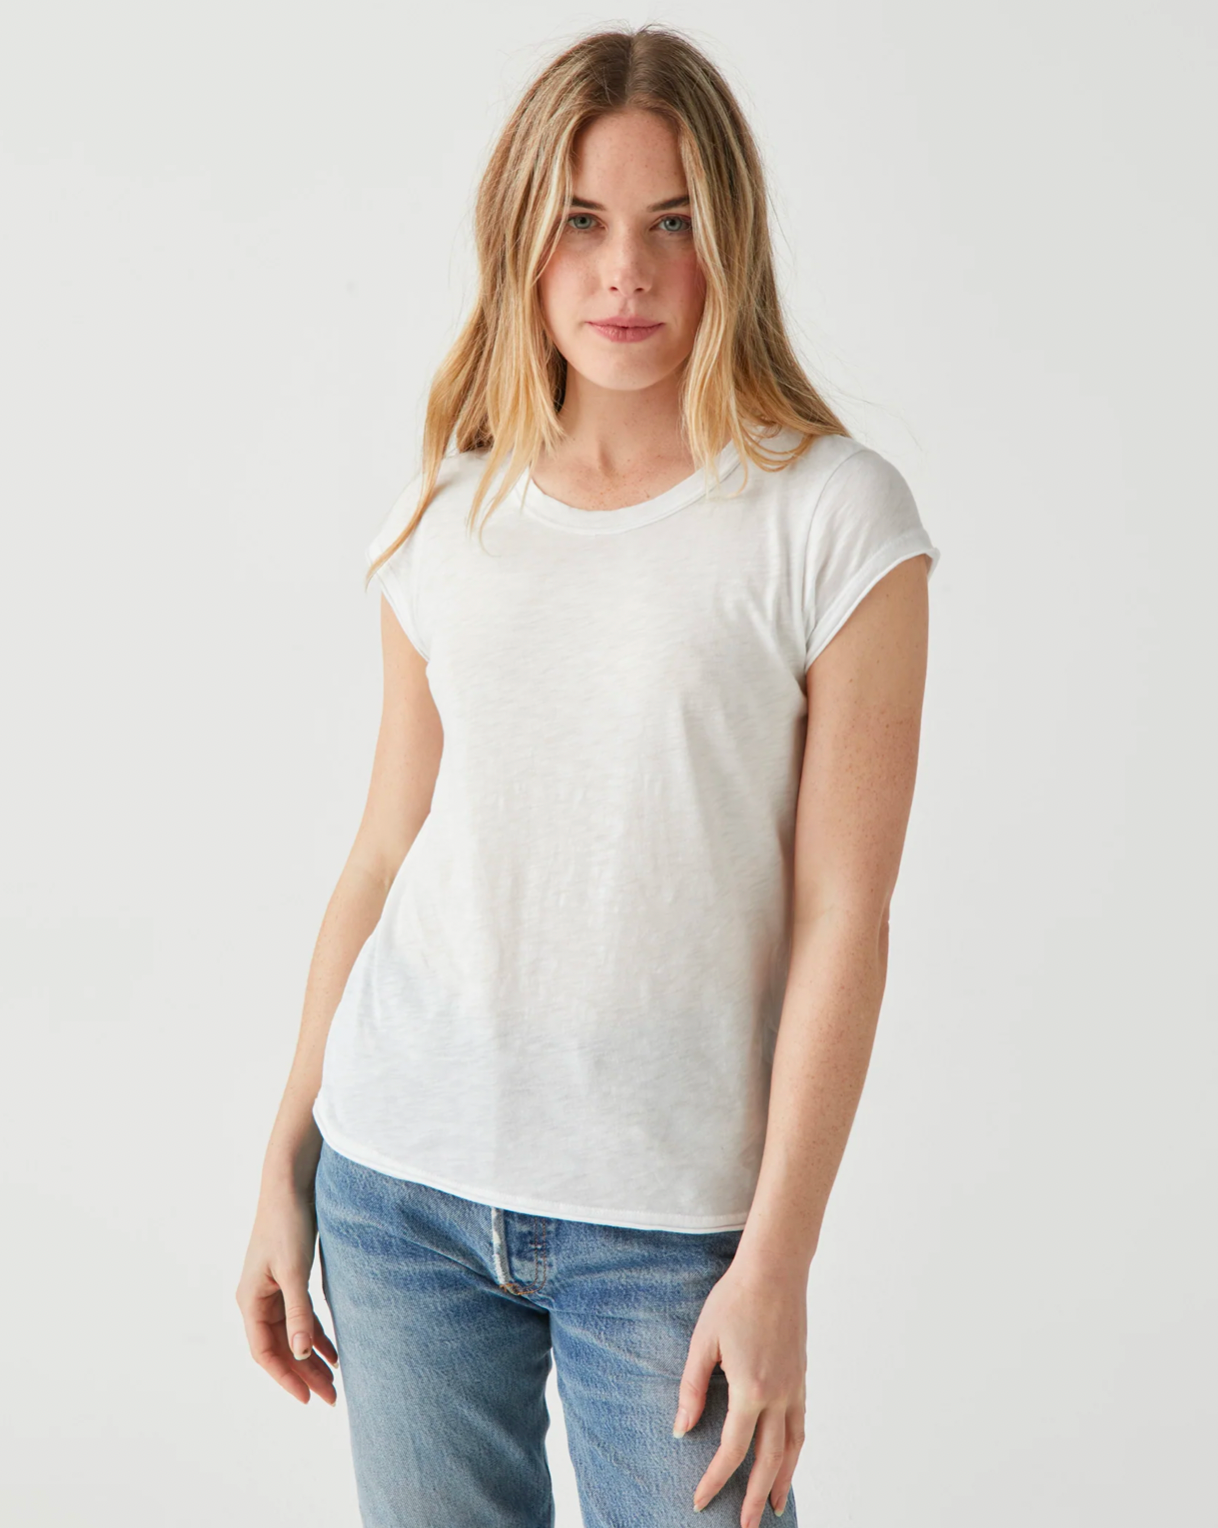 Model wearing Michael Stars White Trudy Crew Tee wearing jeans on a white background